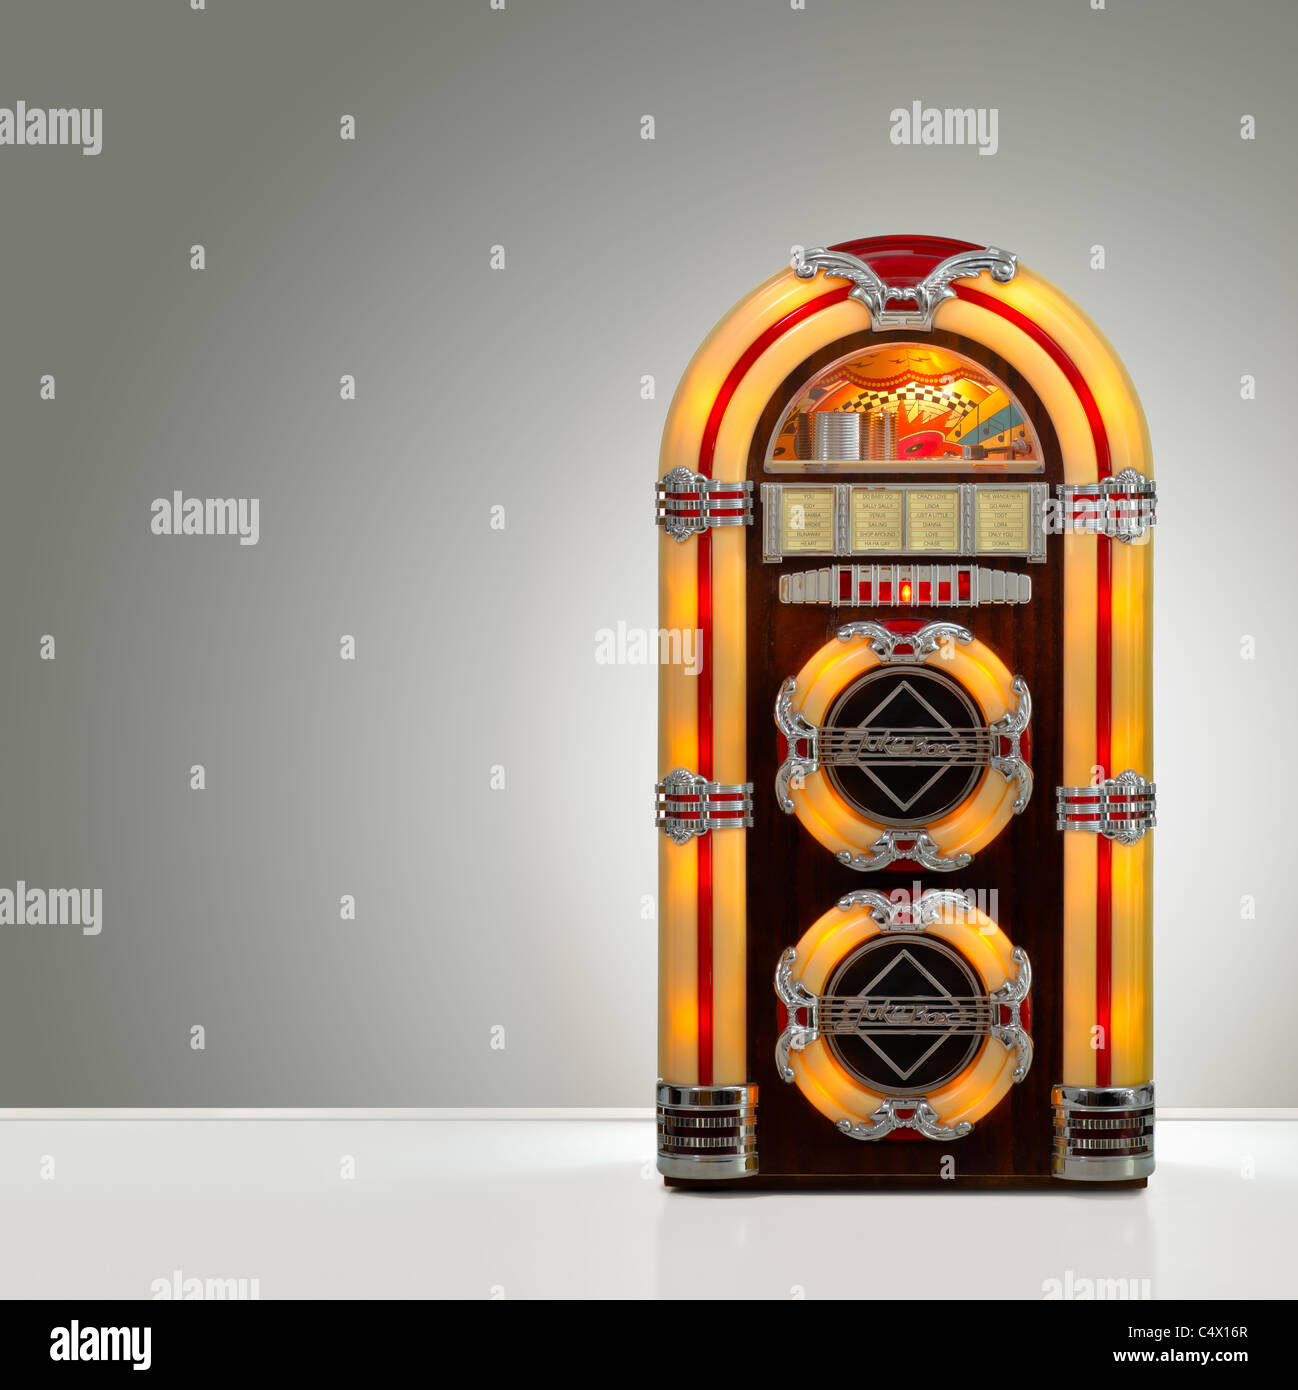 Old retro jukebox in an empty room with nice illumination, copy space ready Stock Photo